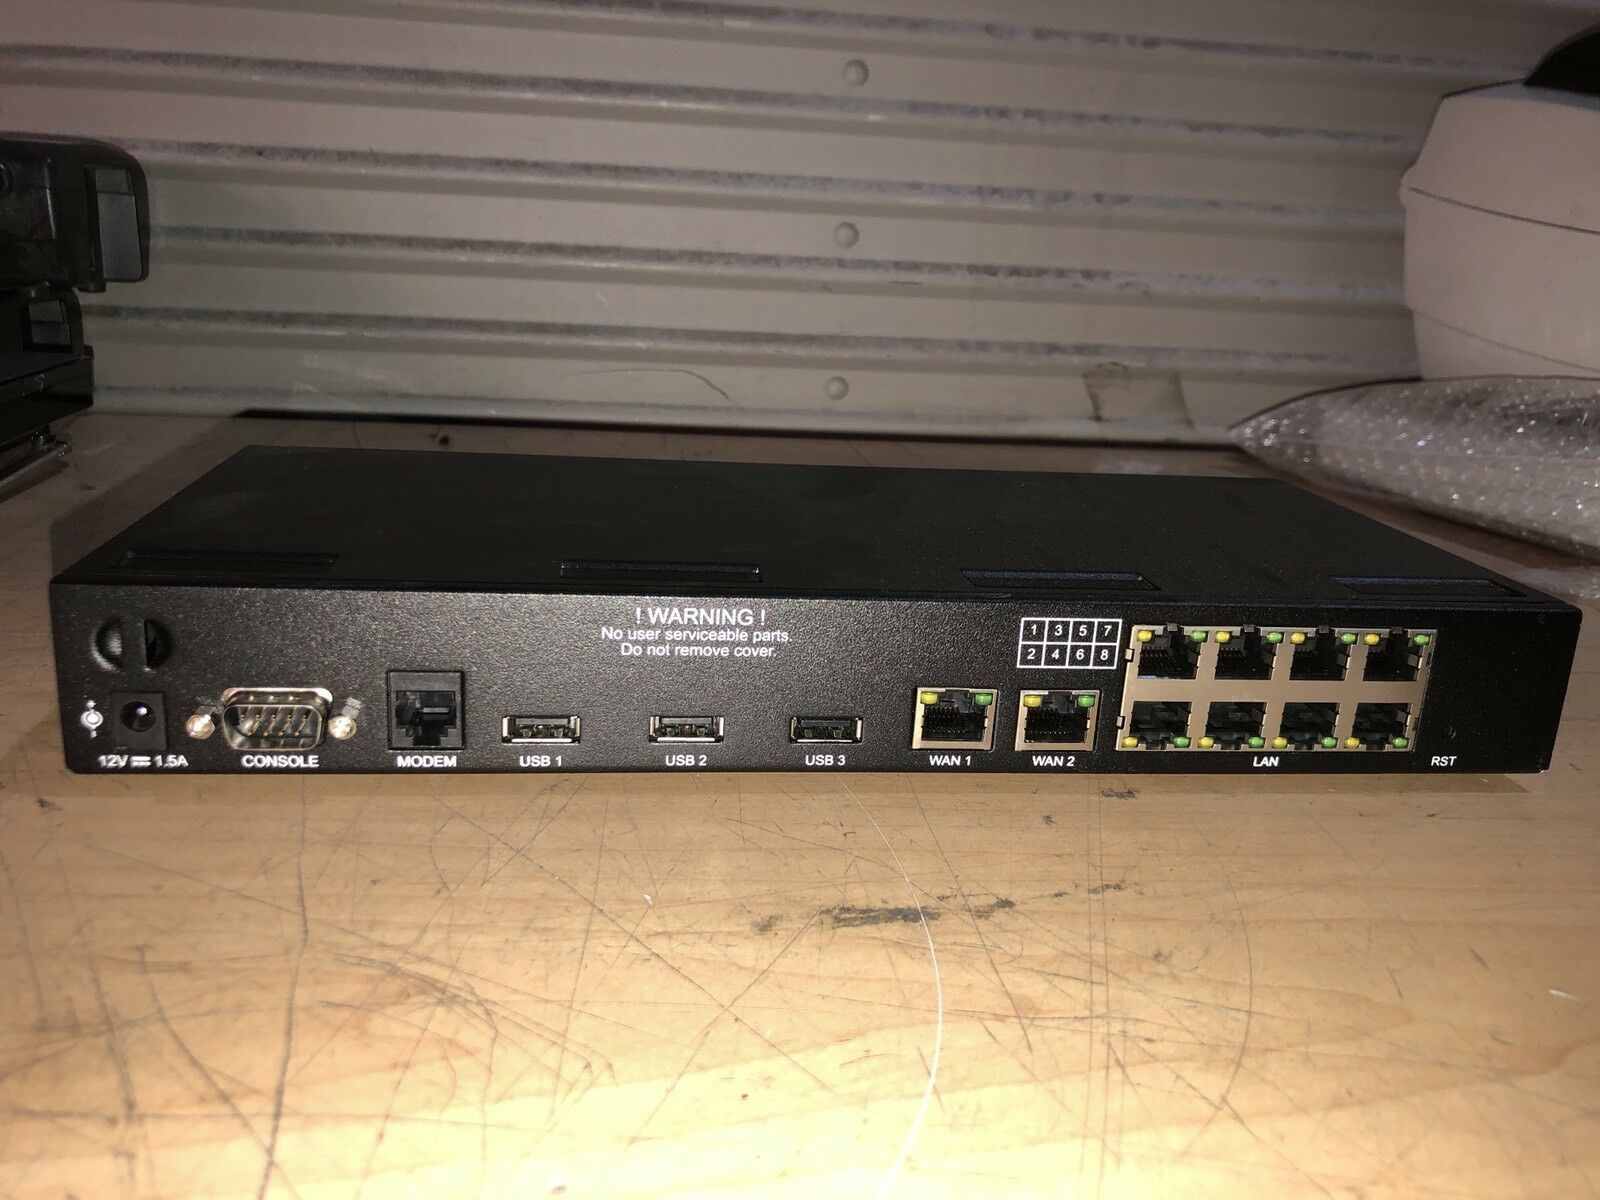 NETGATE 8200 AT&T MCFEE 8-PORT FIREWALL SWITCHES | eBay